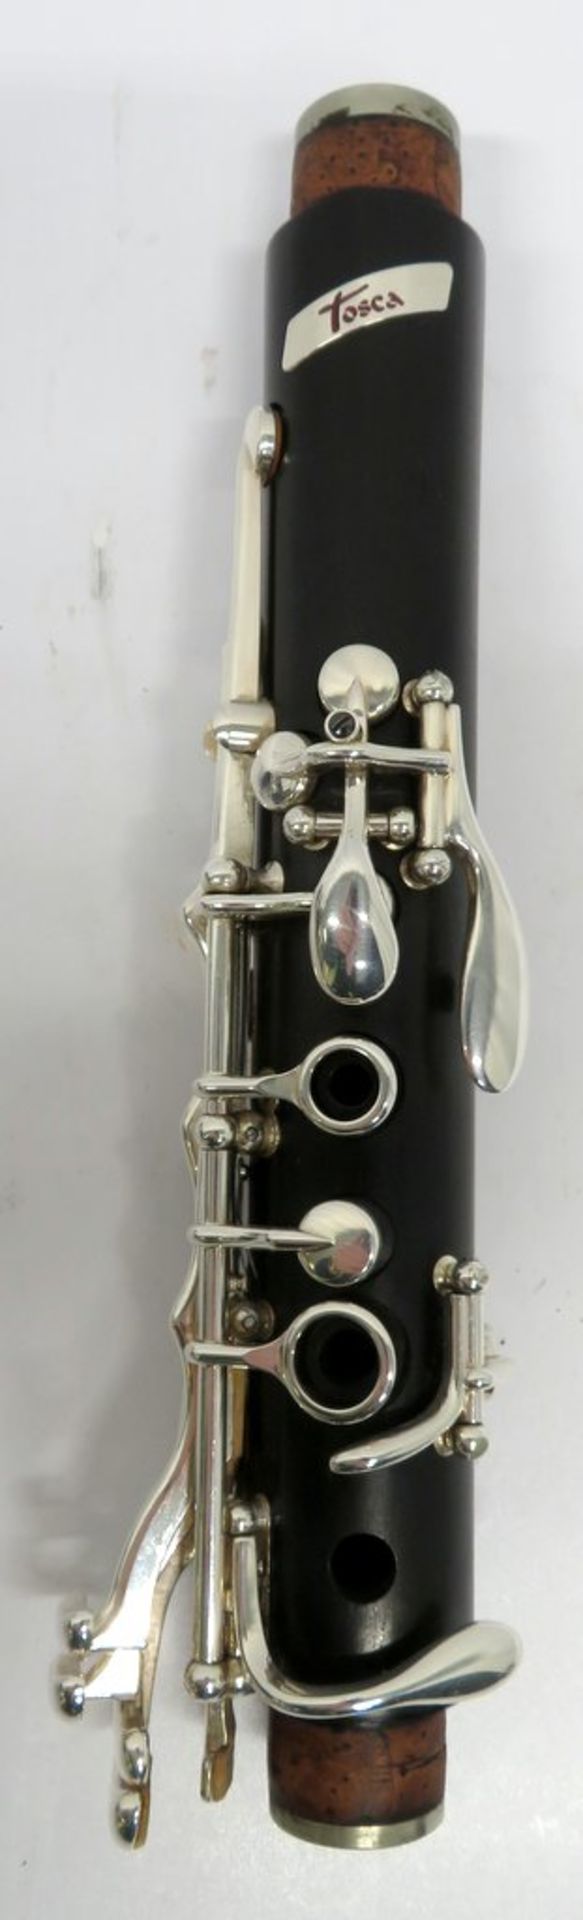 Buffet Crampon Tosca Clarinet Complete With Case. - Image 5 of 15